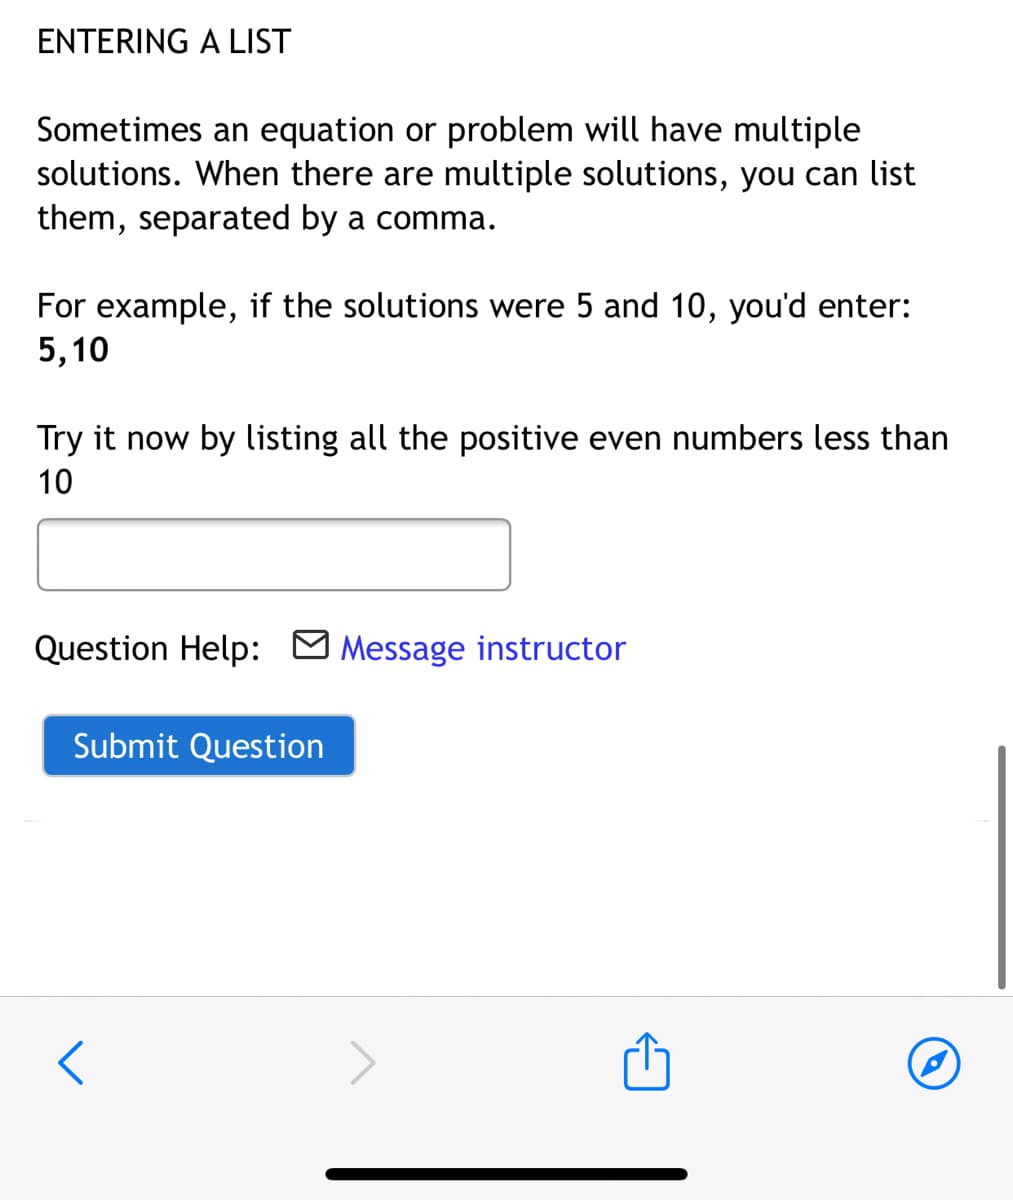 ENTERING A LIST
Sometimes an equation or problem will have multiple
solutions. When there are multiple solutions, you can list
them, separated by a comma.
For example, if the solutions were 5 and 10, you'd enter:
5,10
Try it now by listing all the positive even numbers less than
10
Question Help:
Message instructor
Submit Question
